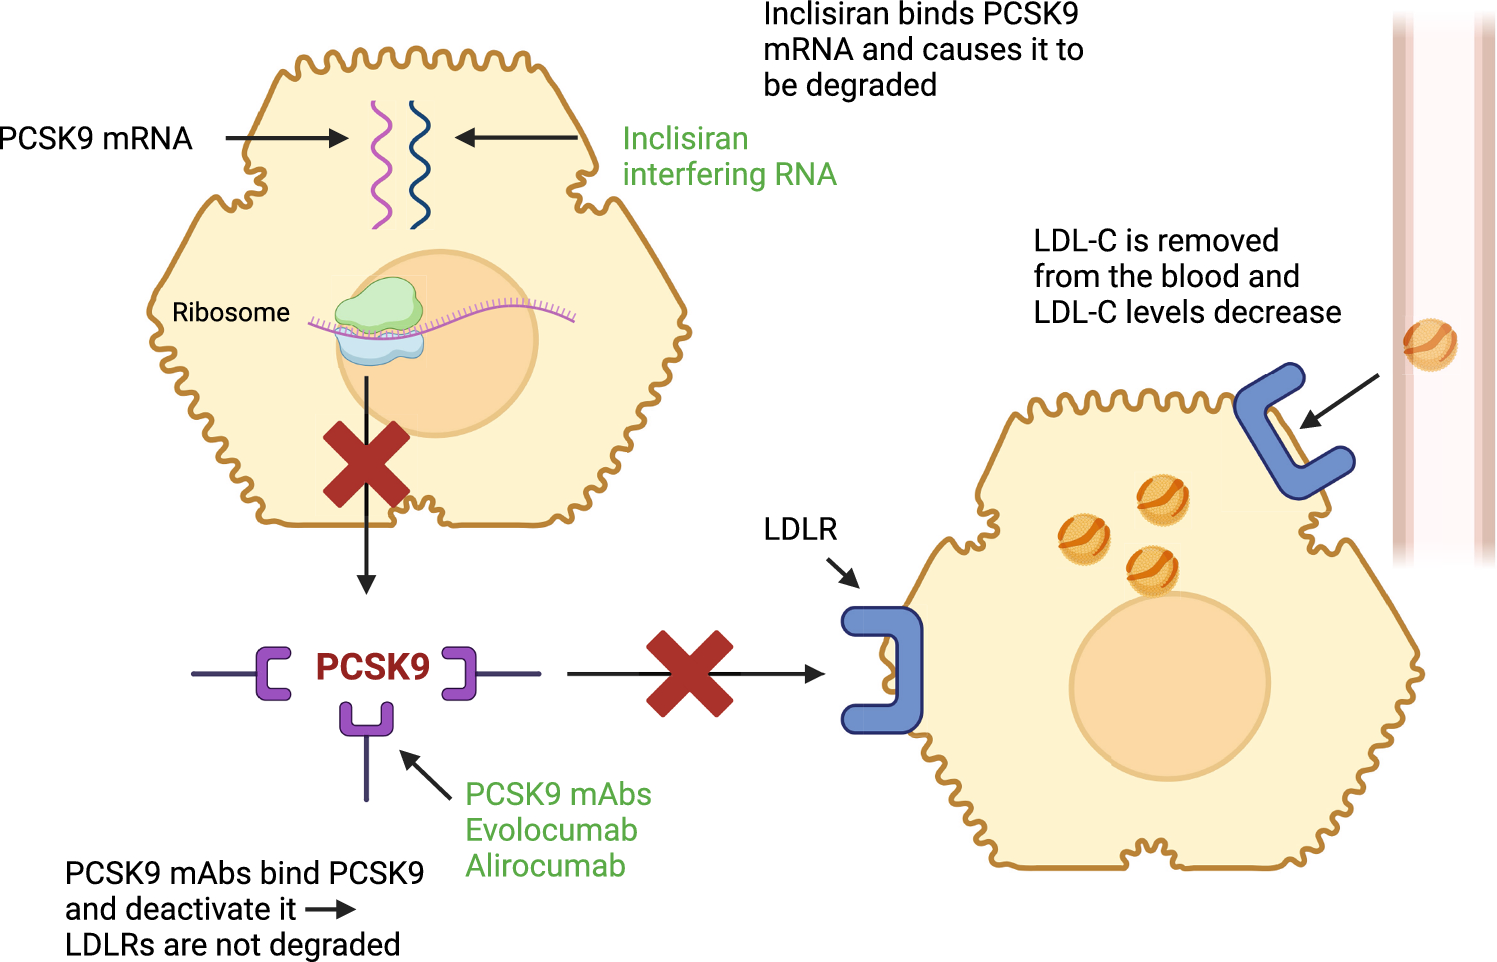 Long-Term Efficacy and Tolerability of PCSK9 Targeted Therapy: A Review of the Literature